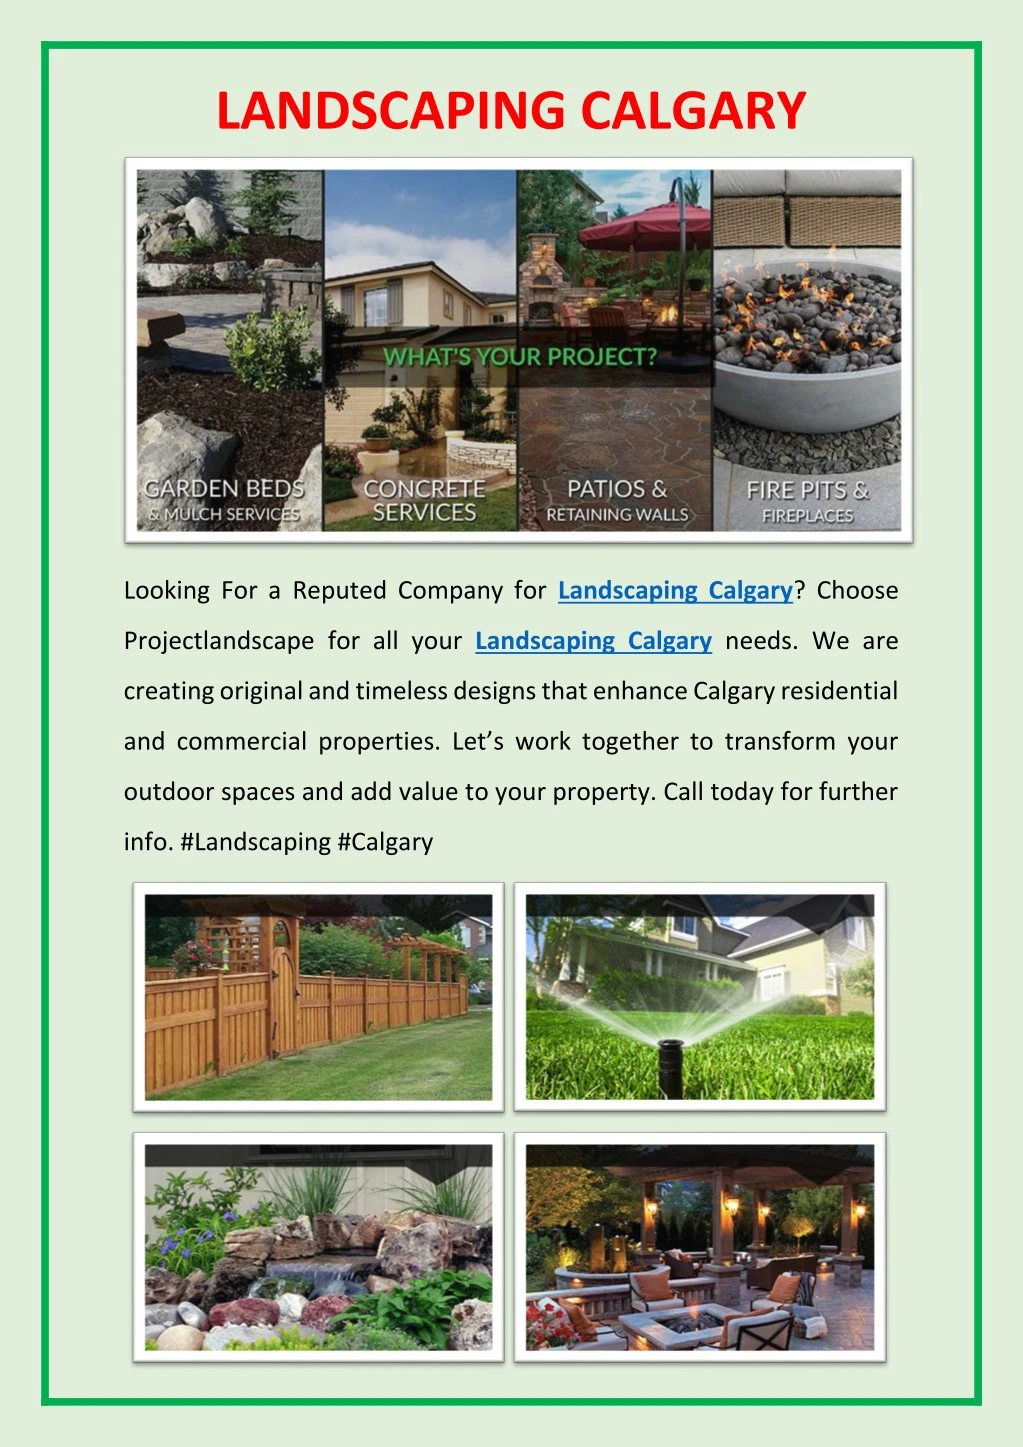 landscaping calgary looking for a reputed company